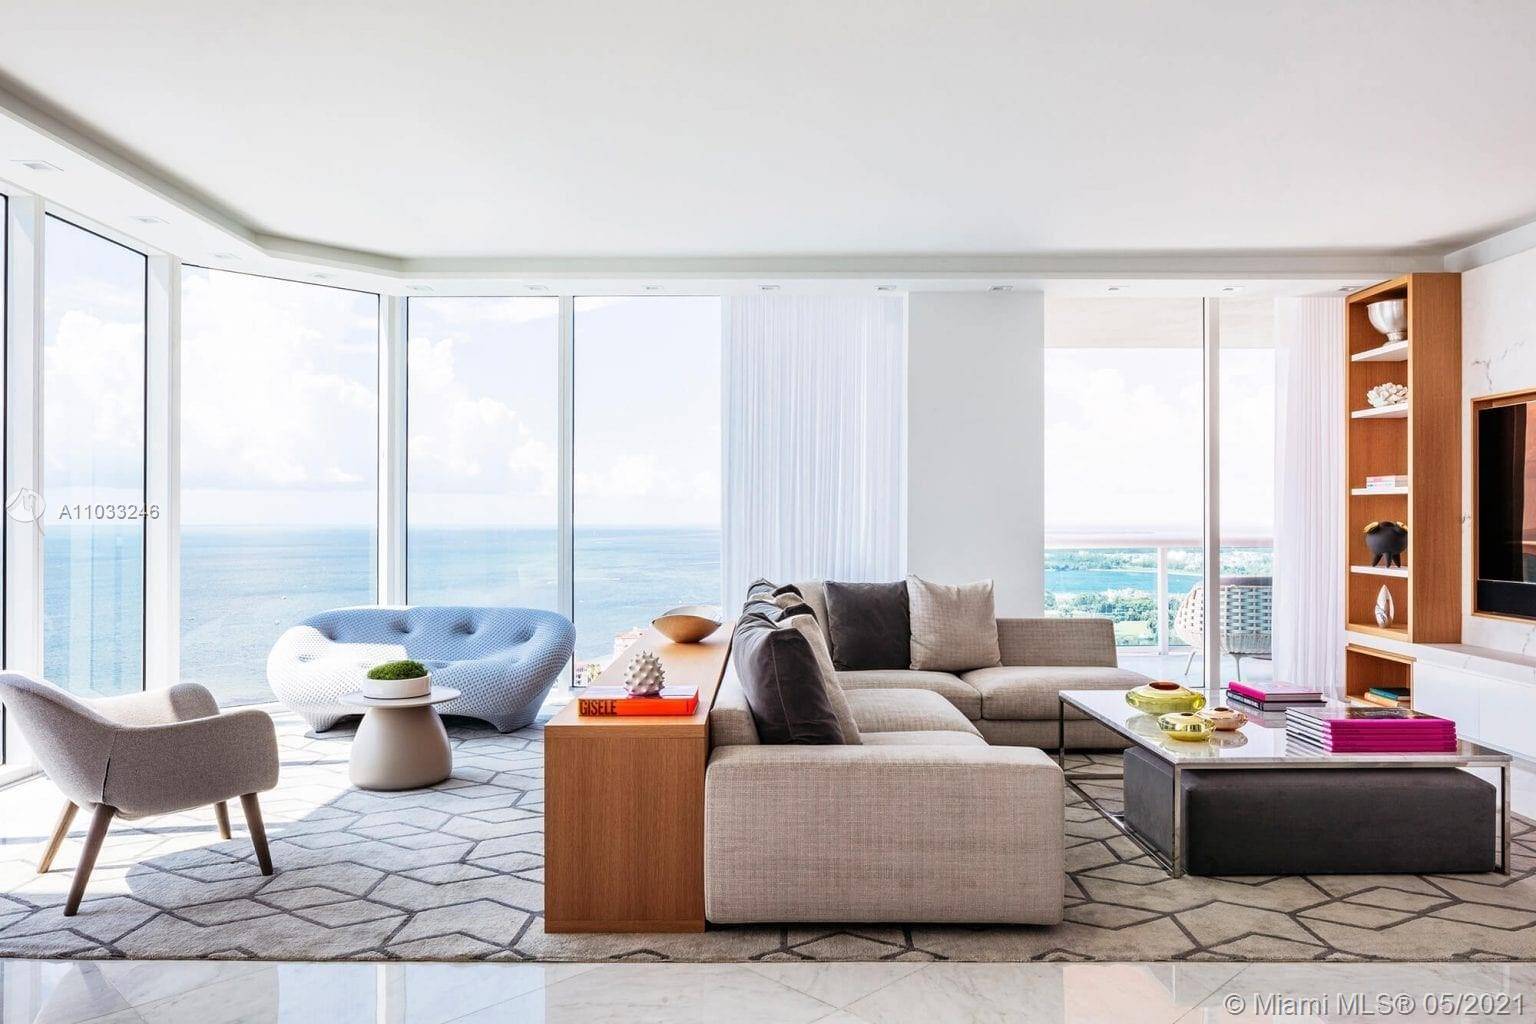 Located on the waterway that connects Biscayne Bay to the Atlantic Ocean you have panoramic views from North Beach all the way around to the Port of Miami.